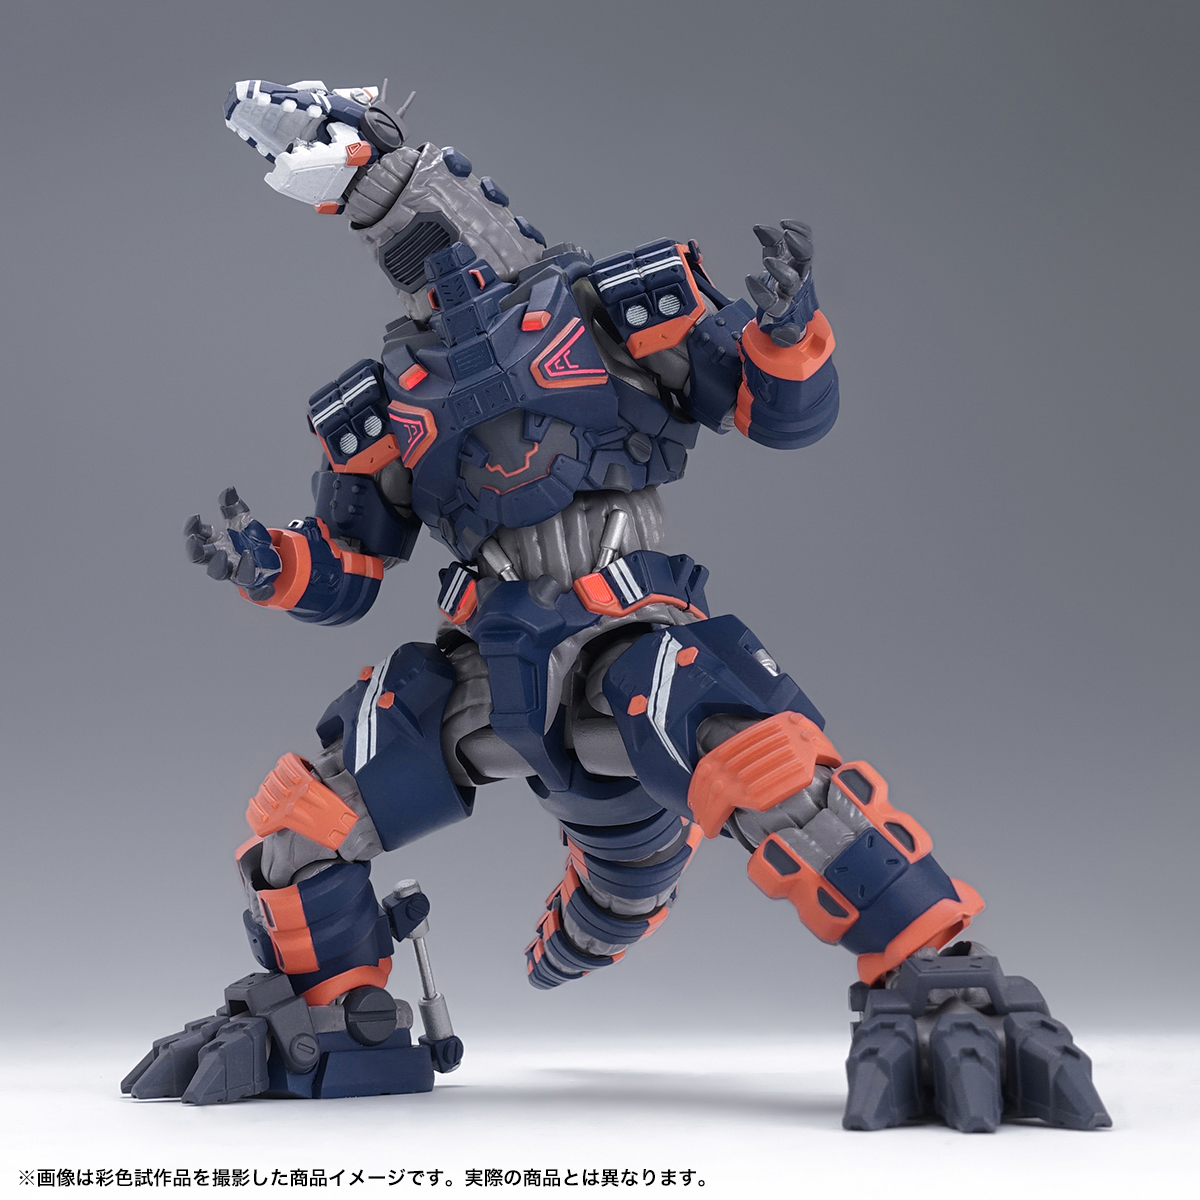 Images from "S.H.Figuarts STAK EARTH GALLON